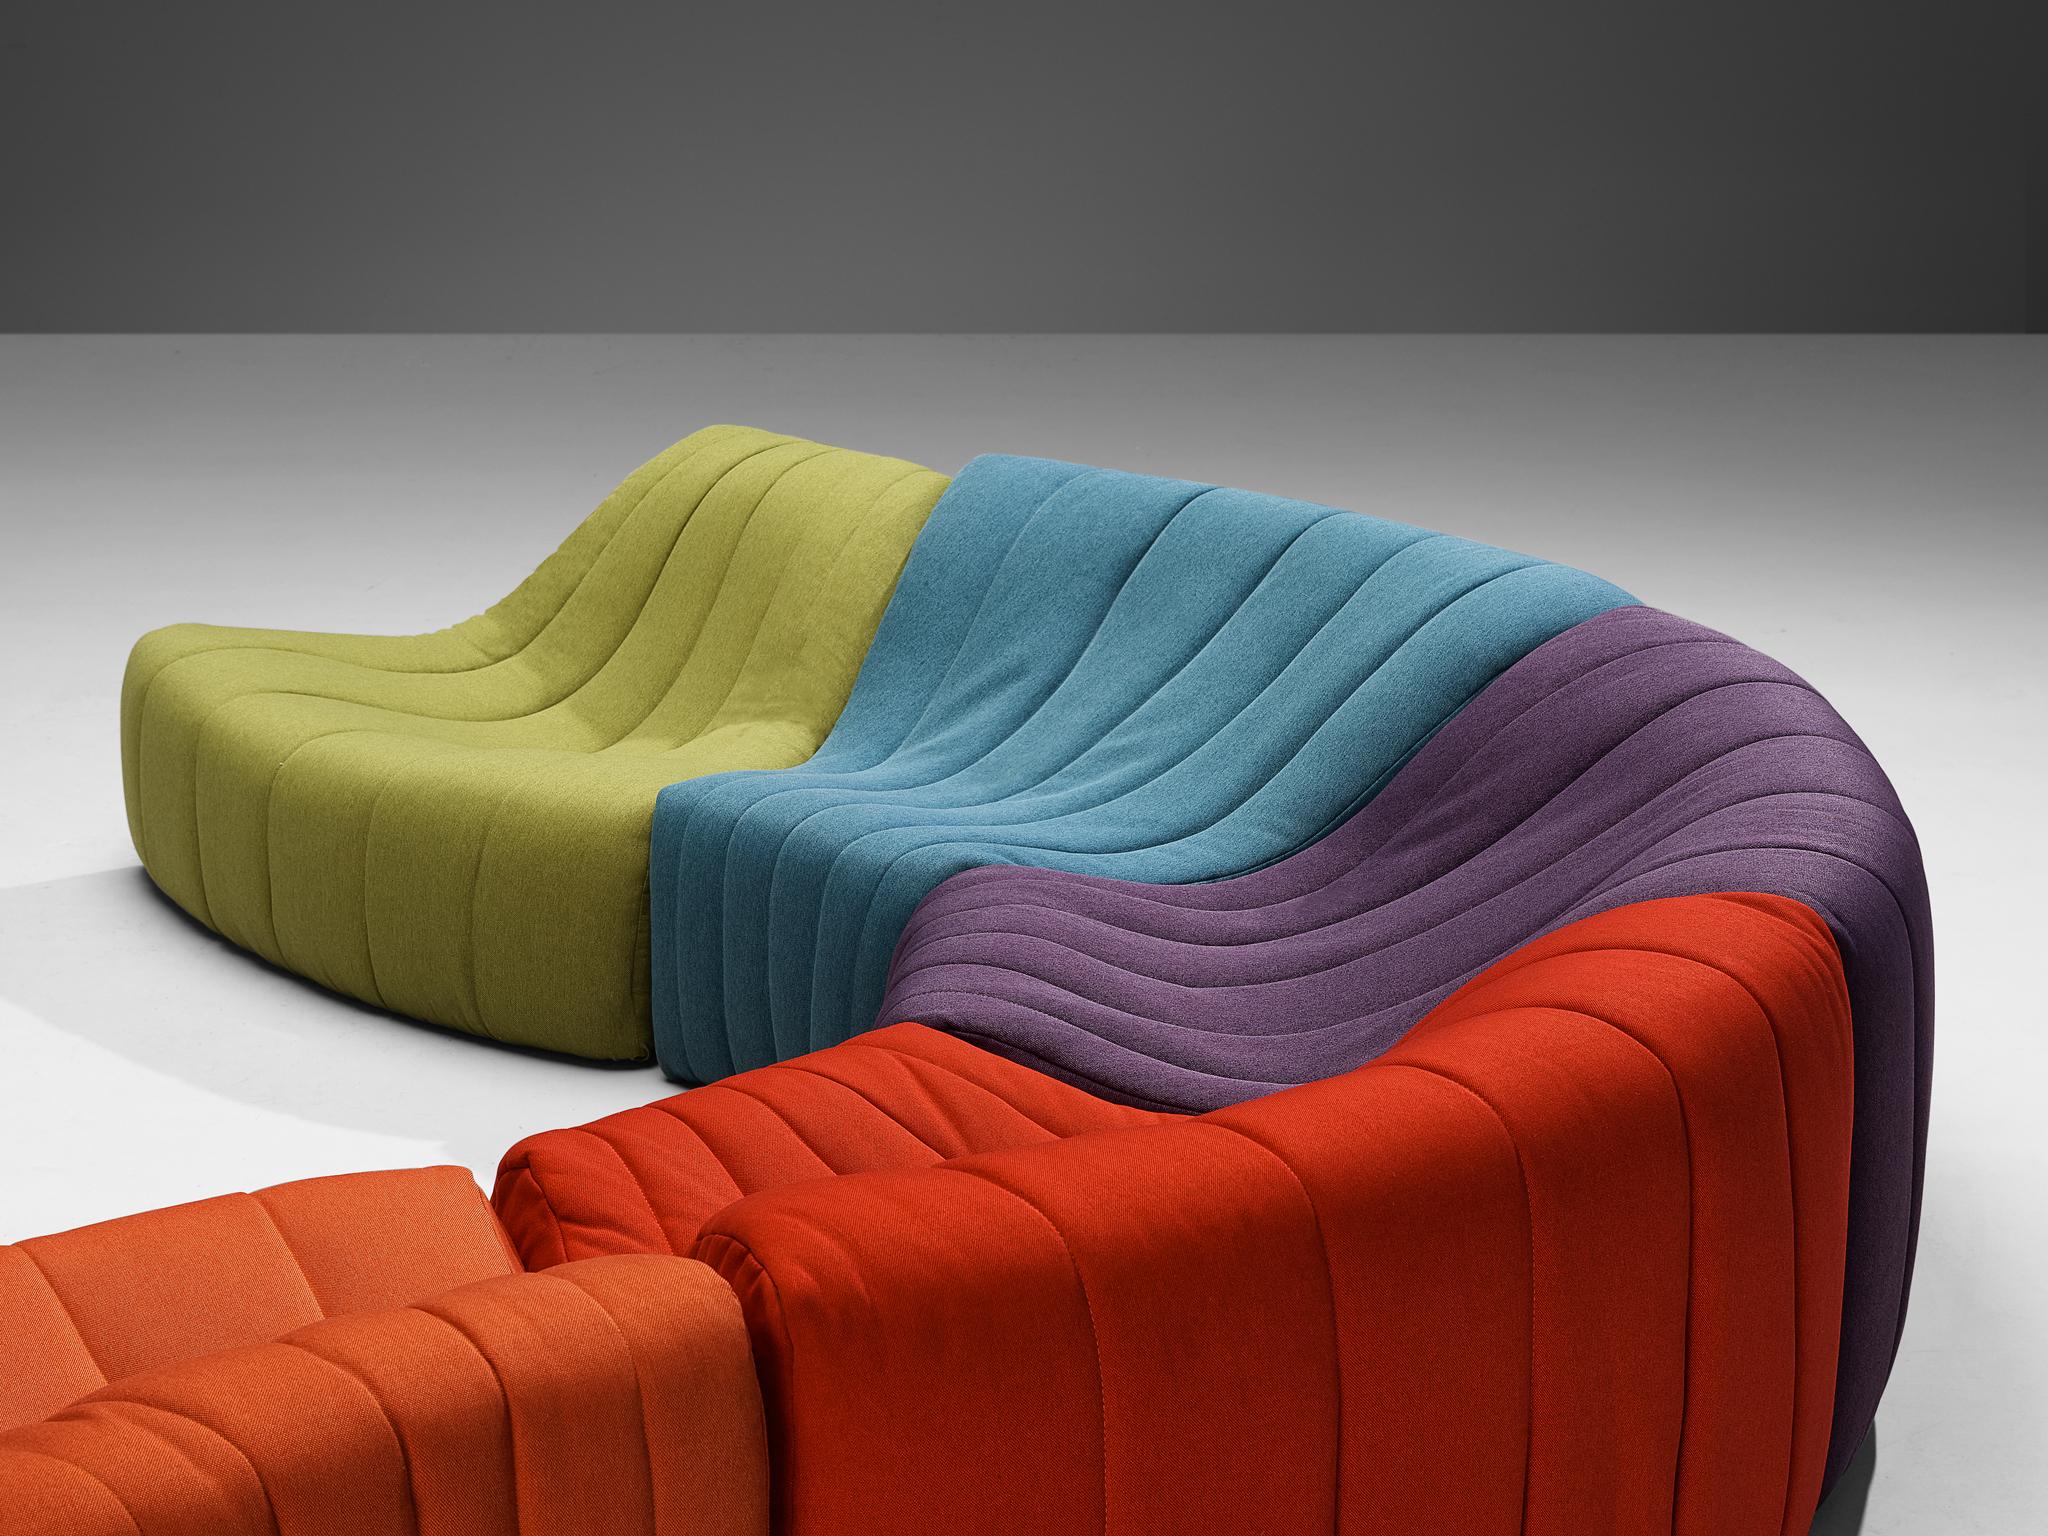 French Kwok Hoi Chan for Steiner 'Chromatic' Multicolored Modular Sofa